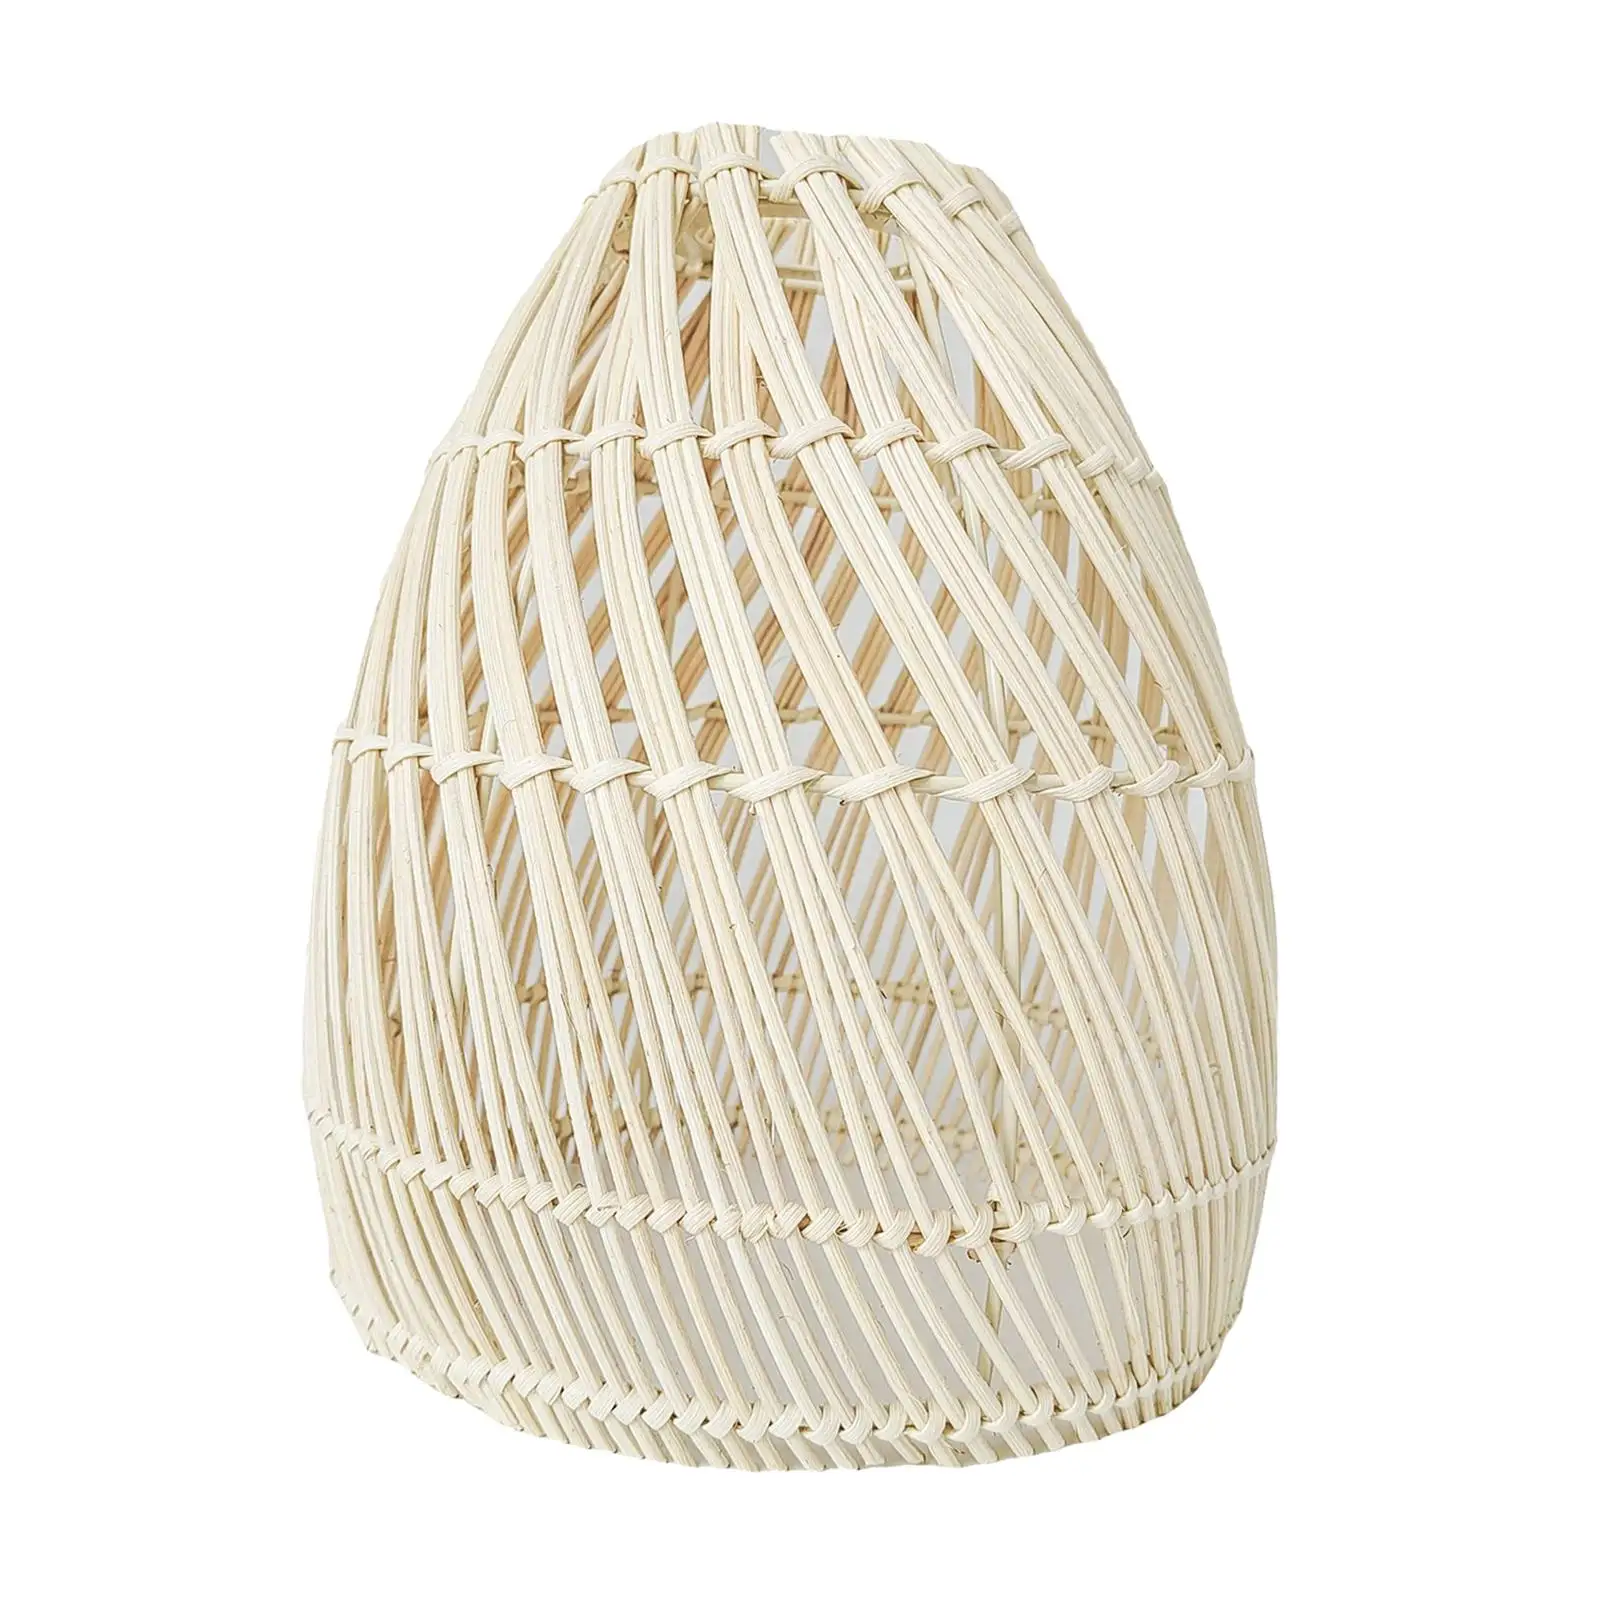 Ceiling Pendant Light Shade 1 Piece Weaved Light Fixture Wicker Lamp Shade for Pendant Light, Dining Room hotels Room Home